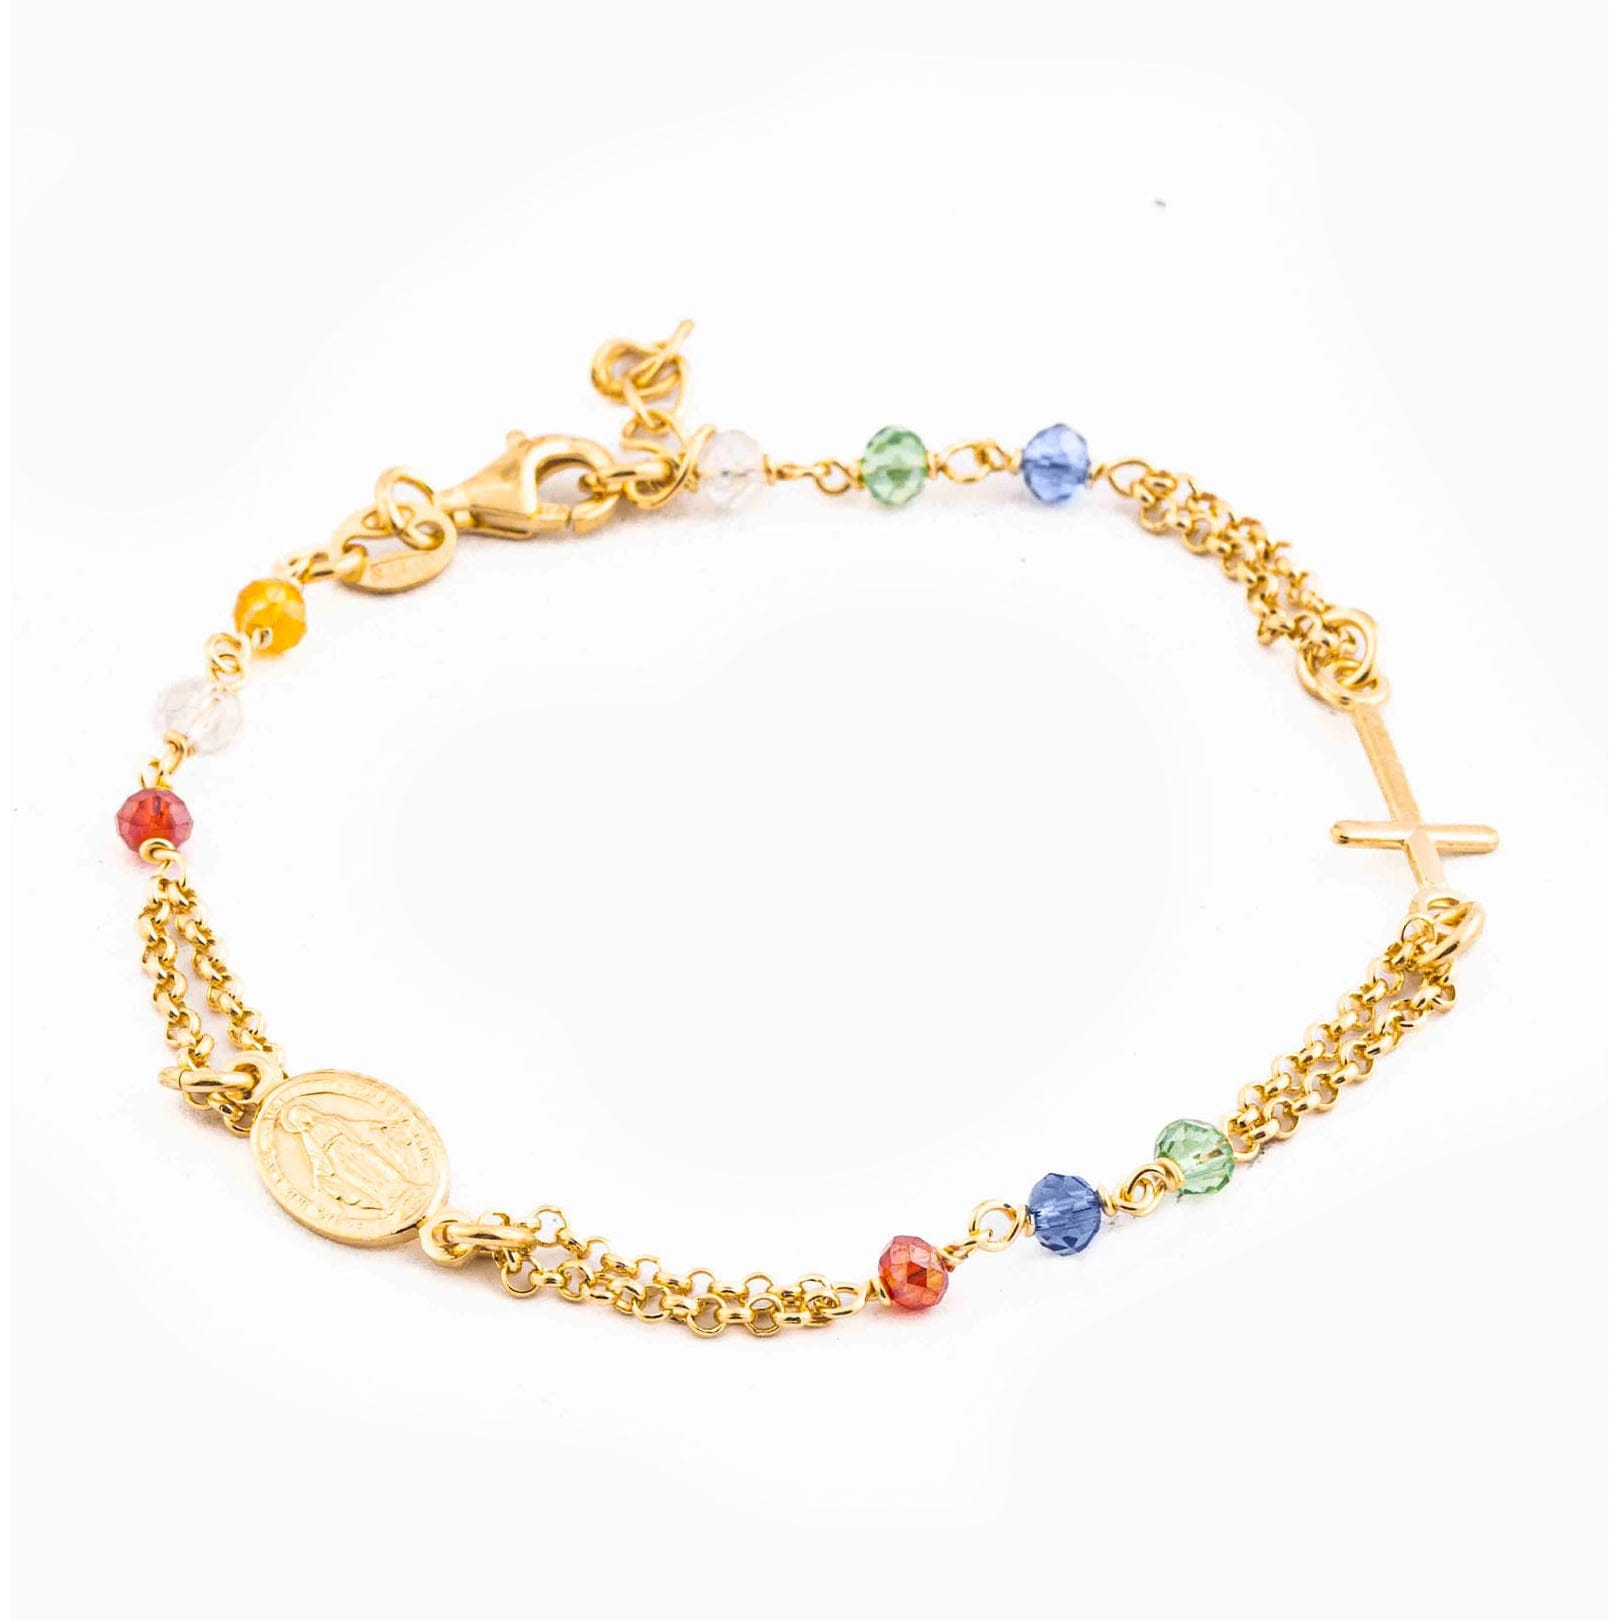 MONDO CATTOLICO Prayer Beads Gold / Cm 17.5 (6.9 in) / Cm 3 (1.2 in) STERLING SILVER ROSARY BRACELET DOUBLE CHAIN MULTICOLOR FACETED BEADS